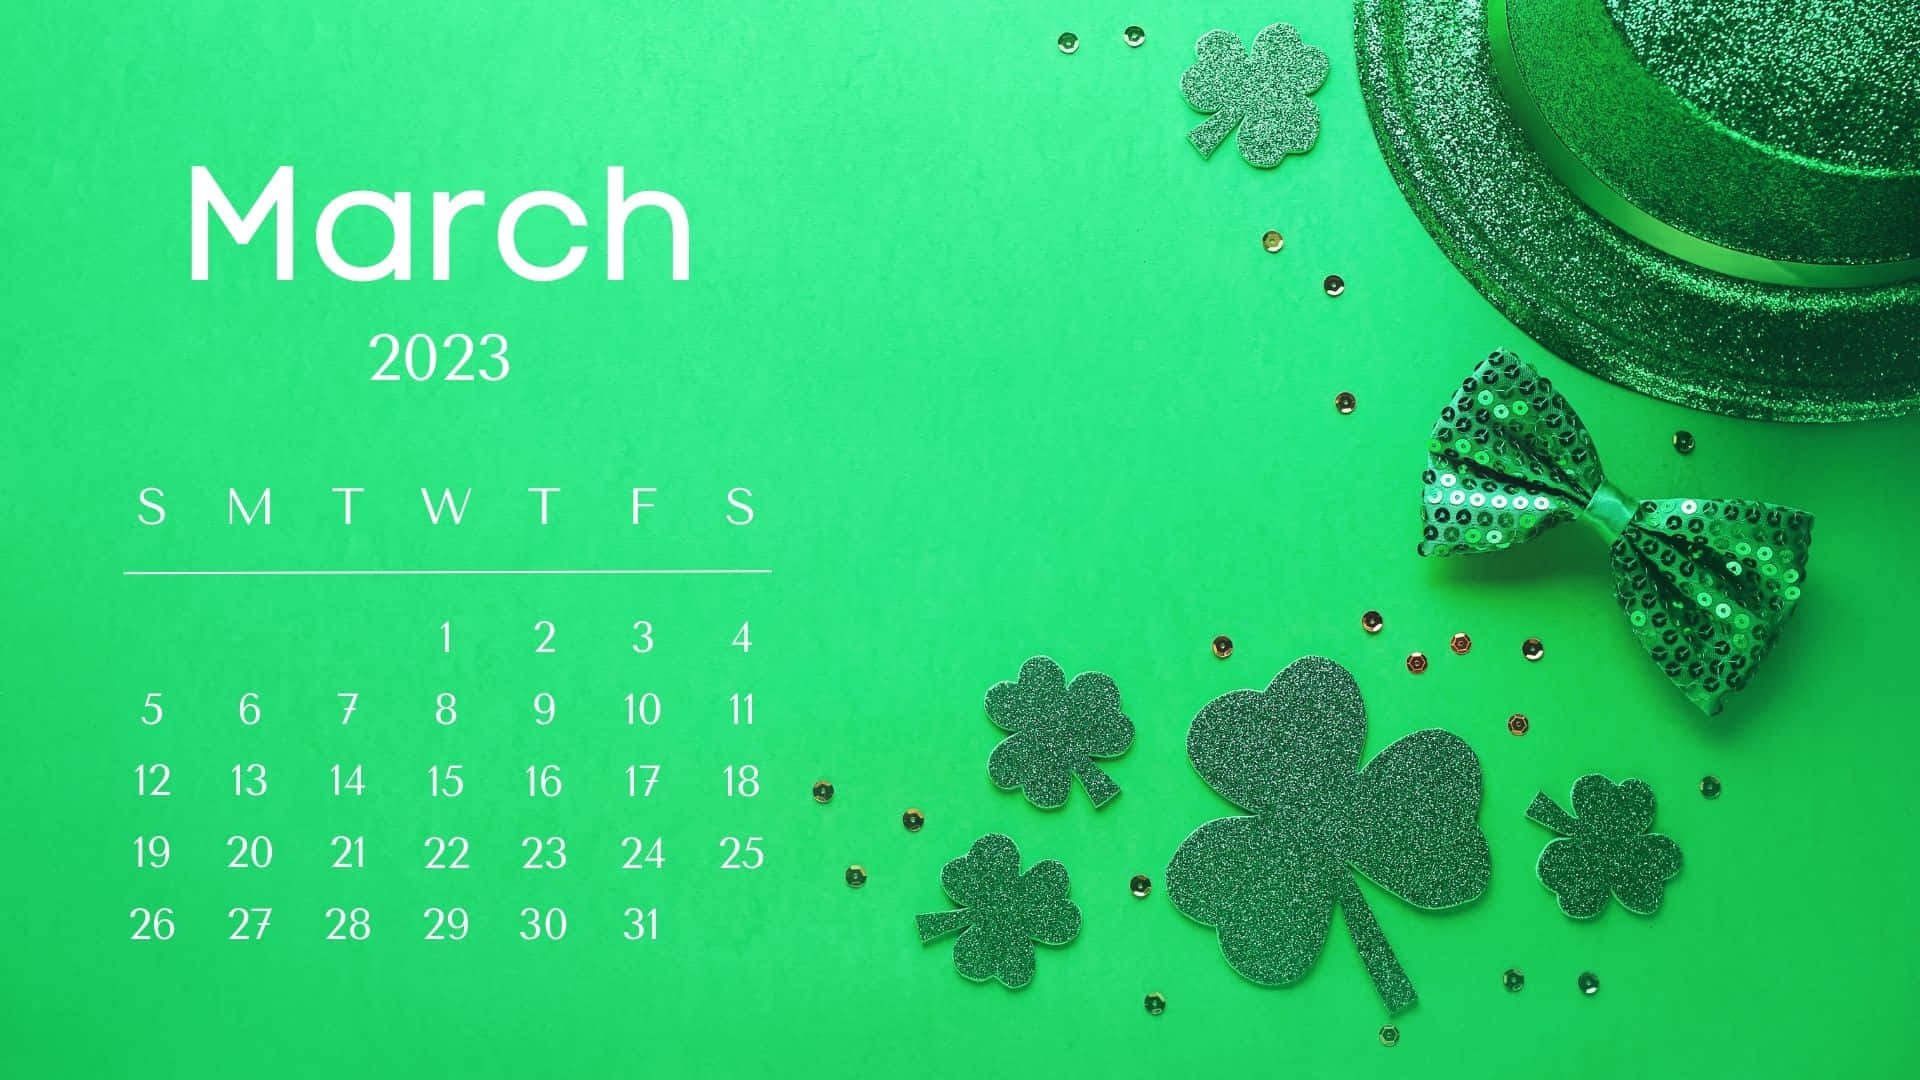 Download Get Ready for March 2023 Calendar Wallpaper | Wallpapers.com